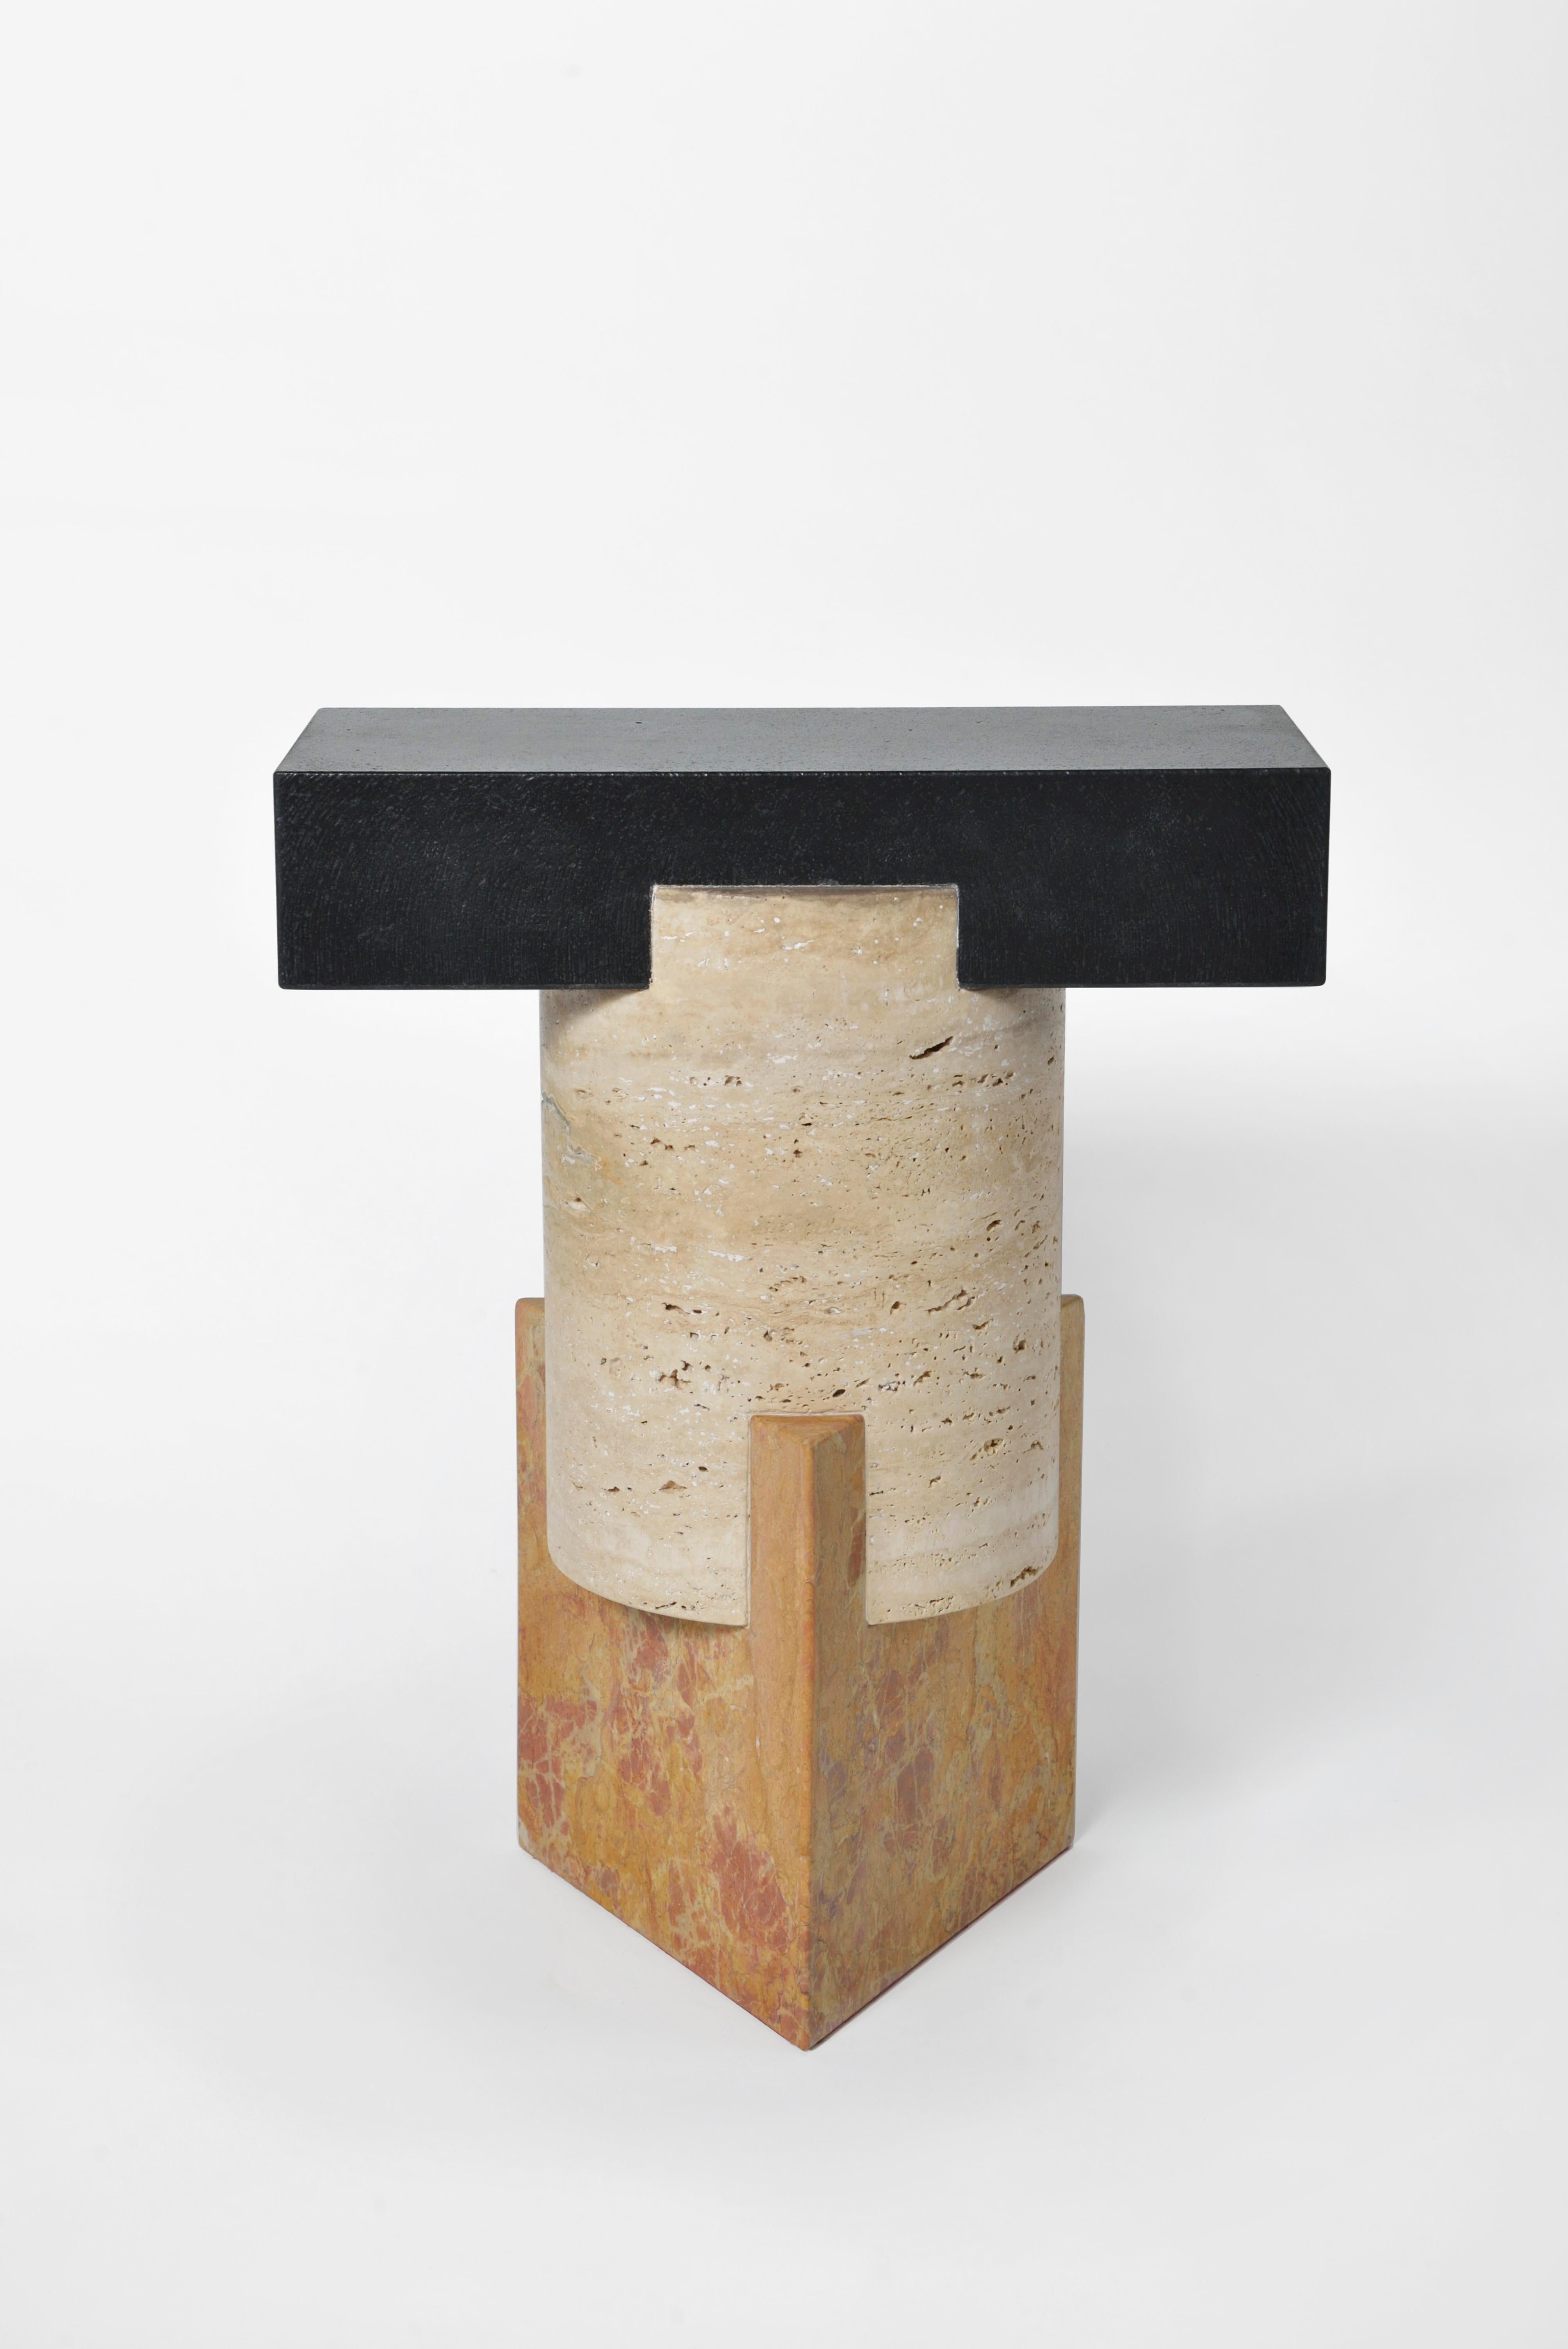 Marble Tuskan stool by Oeuffice
Edition: 12 + 2AP
2014
Dimensions: 34 x 21 x 42 cm
Materials: Nero Assoluto stone, Travertino stone, Giallo Reale marble 

Kapital is a series of limited edition tables and stools based on essential forms,